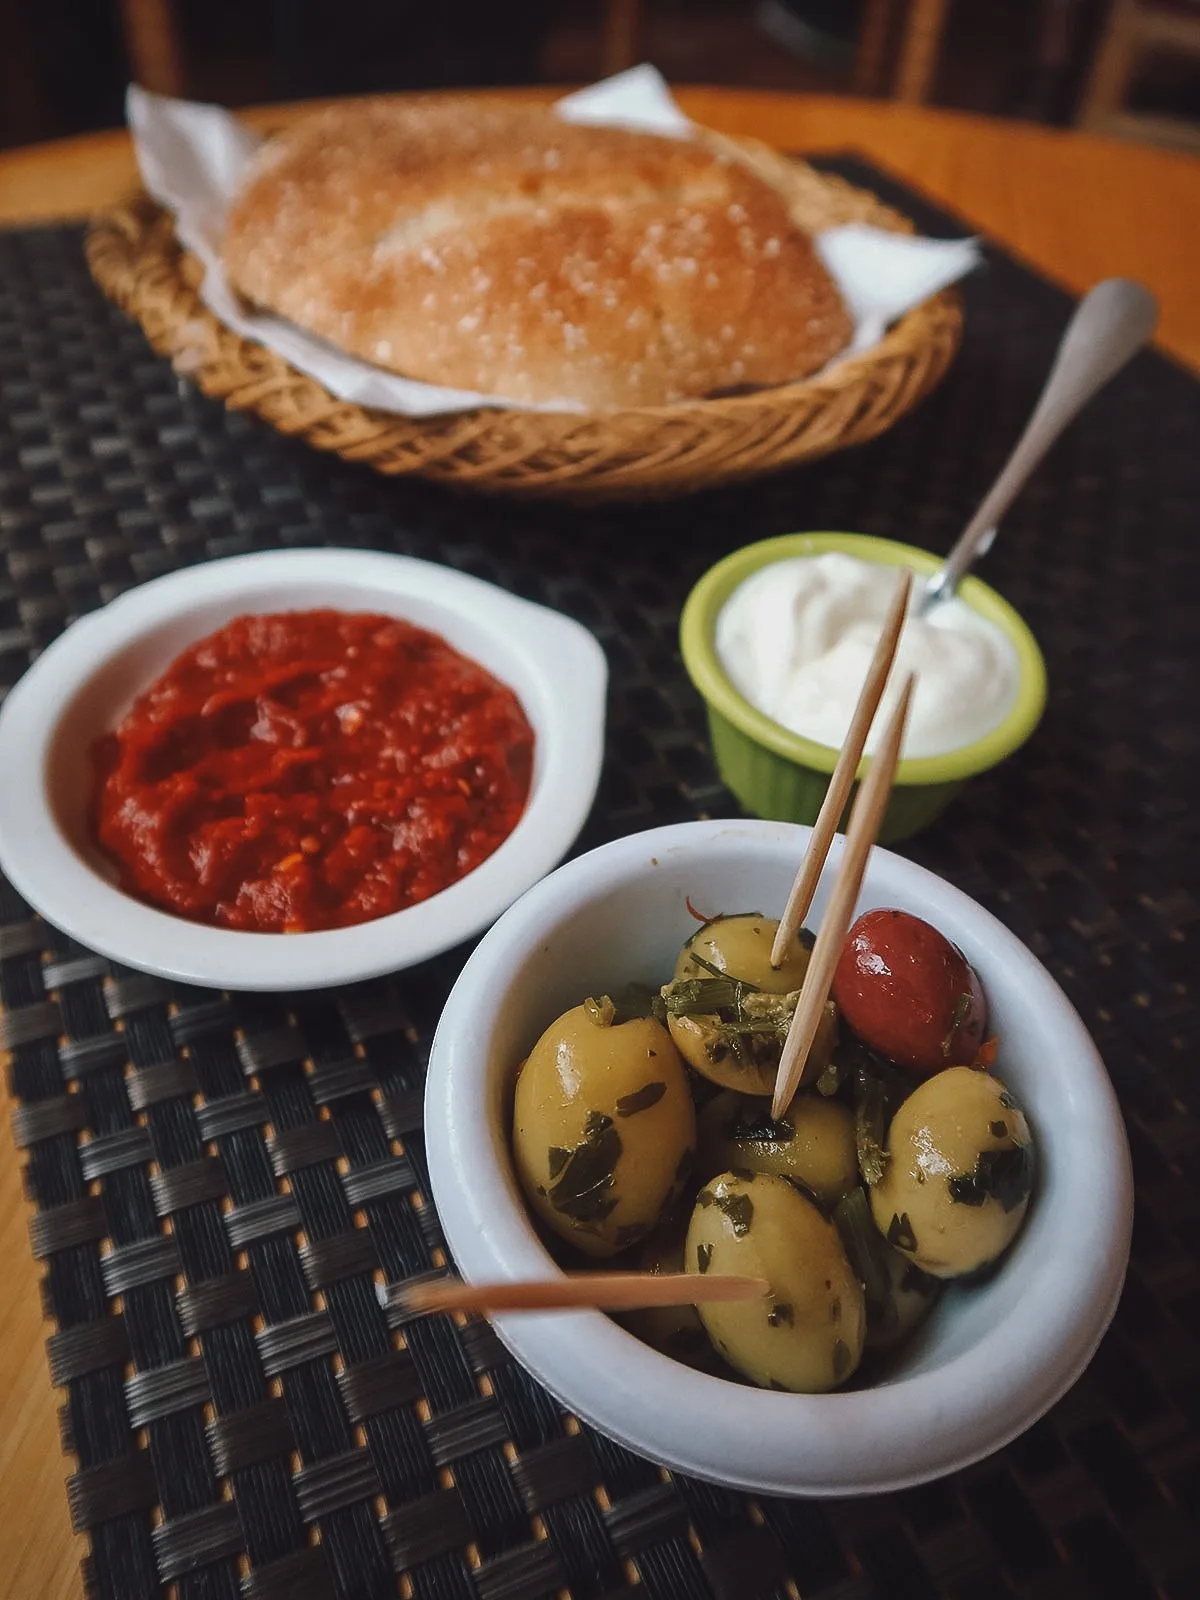 Olives and Moroccan bread at a restaurant in Marrakech